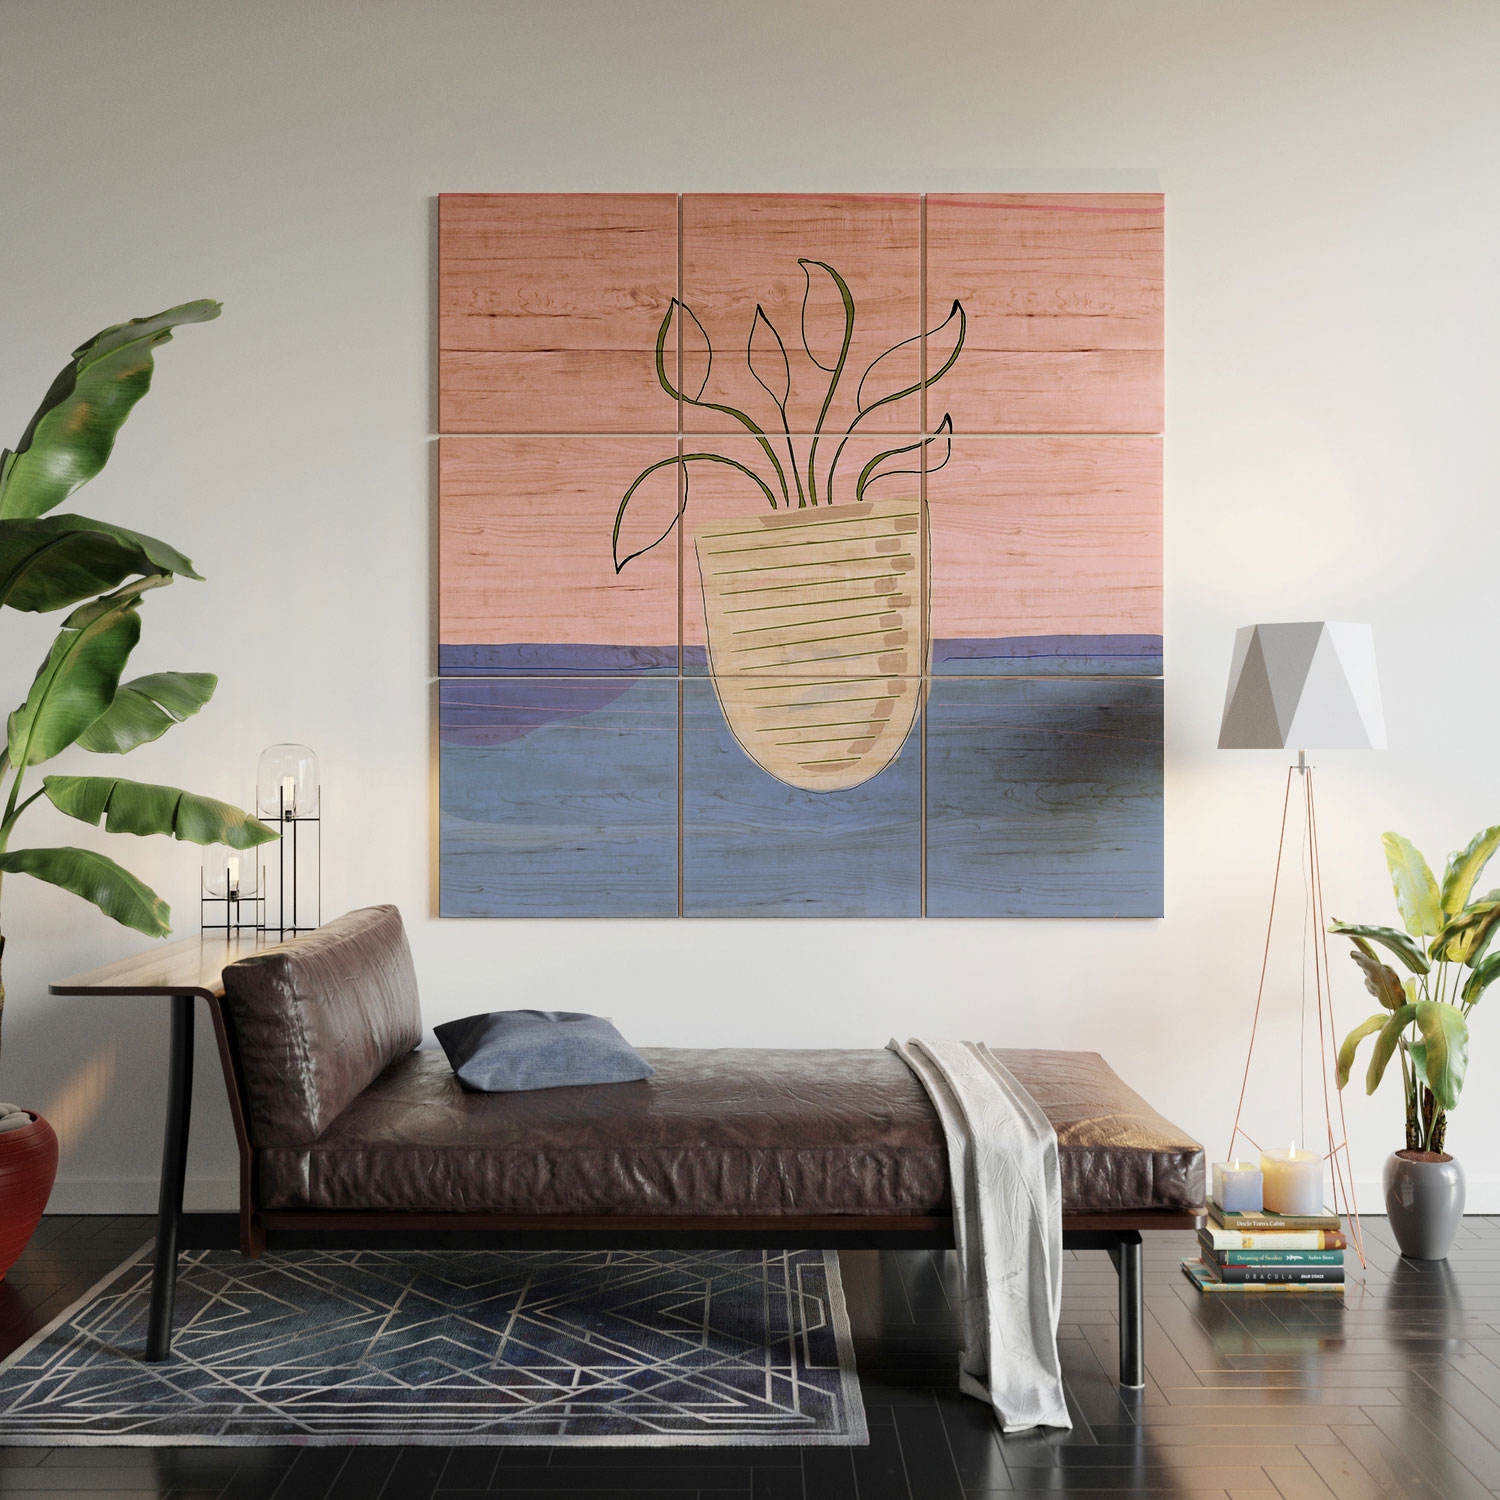 Sprout by Laura Fedorowicz - Wood Wall Mural3' X 3' (Nine 12" Wood Squares) - Image 4